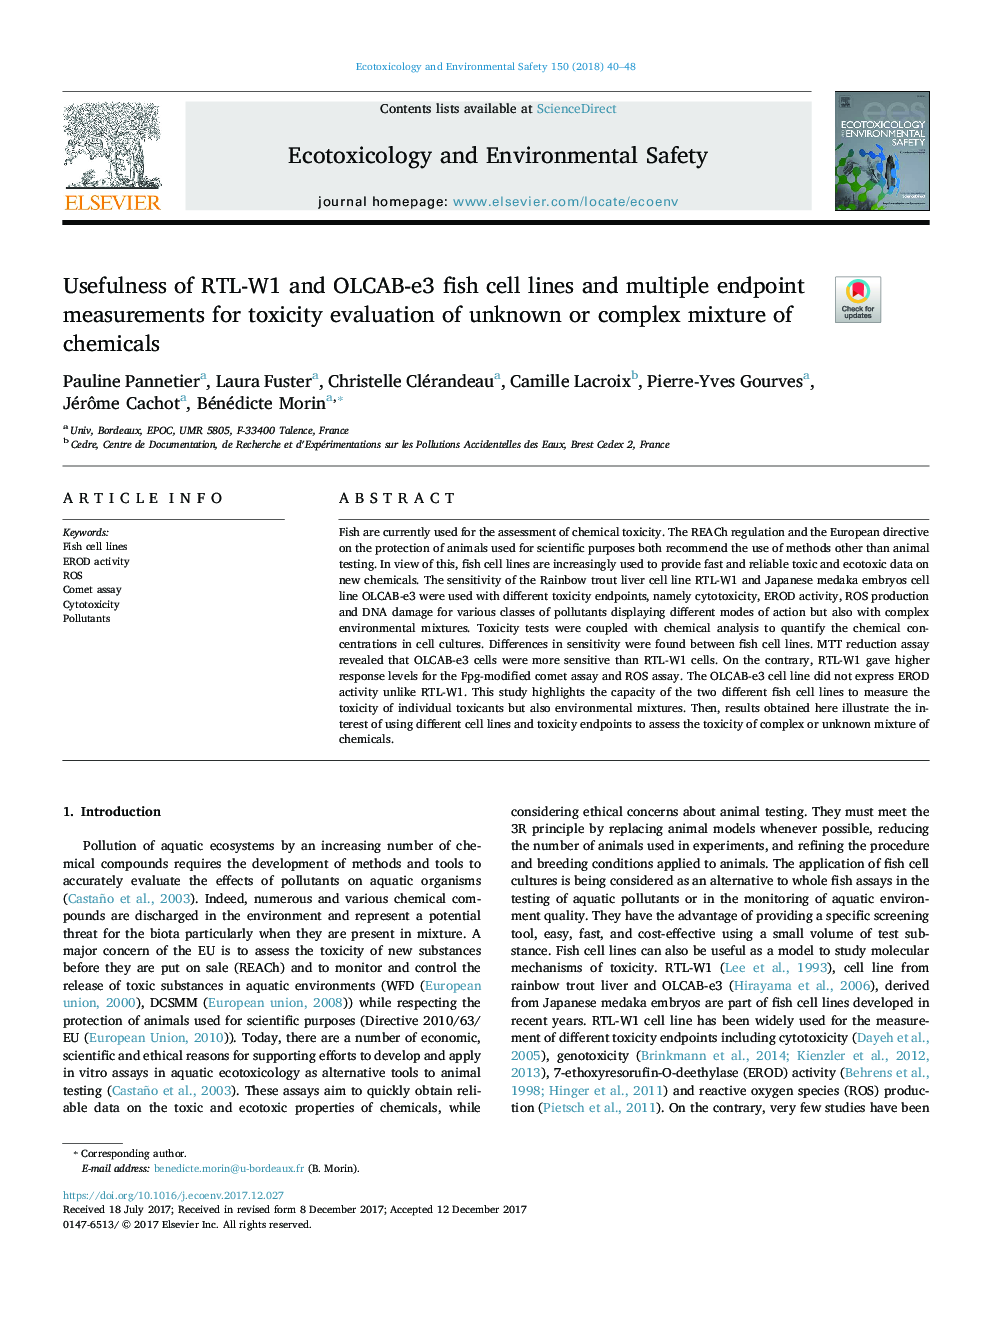 Usefulness of RTL-W1 and OLCAB-e3 fish cell lines and multiple endpoint measurements for toxicity evaluation of unknown or complex mixture of chemicals